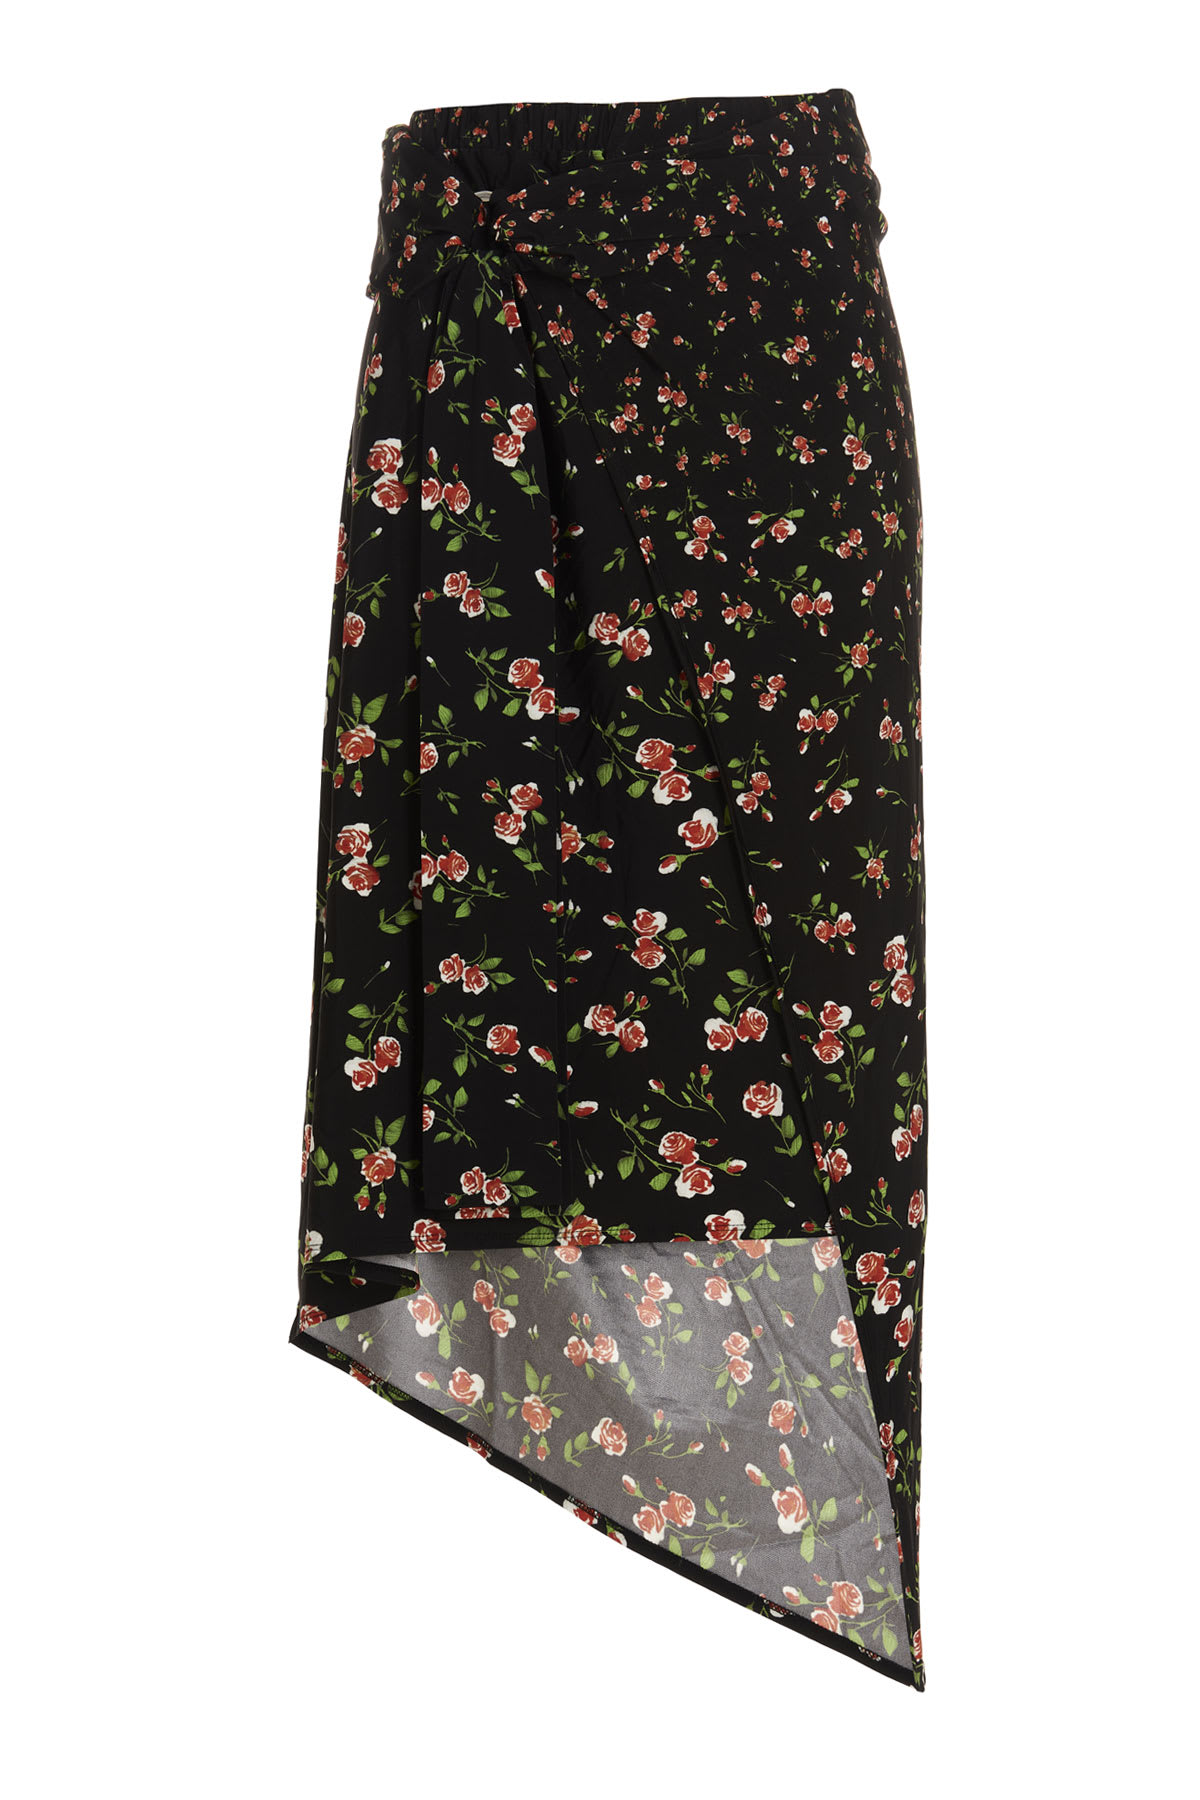 Paco Rabanne Floral Print Skirt In Viscose Featuring An Elasticated Waist.